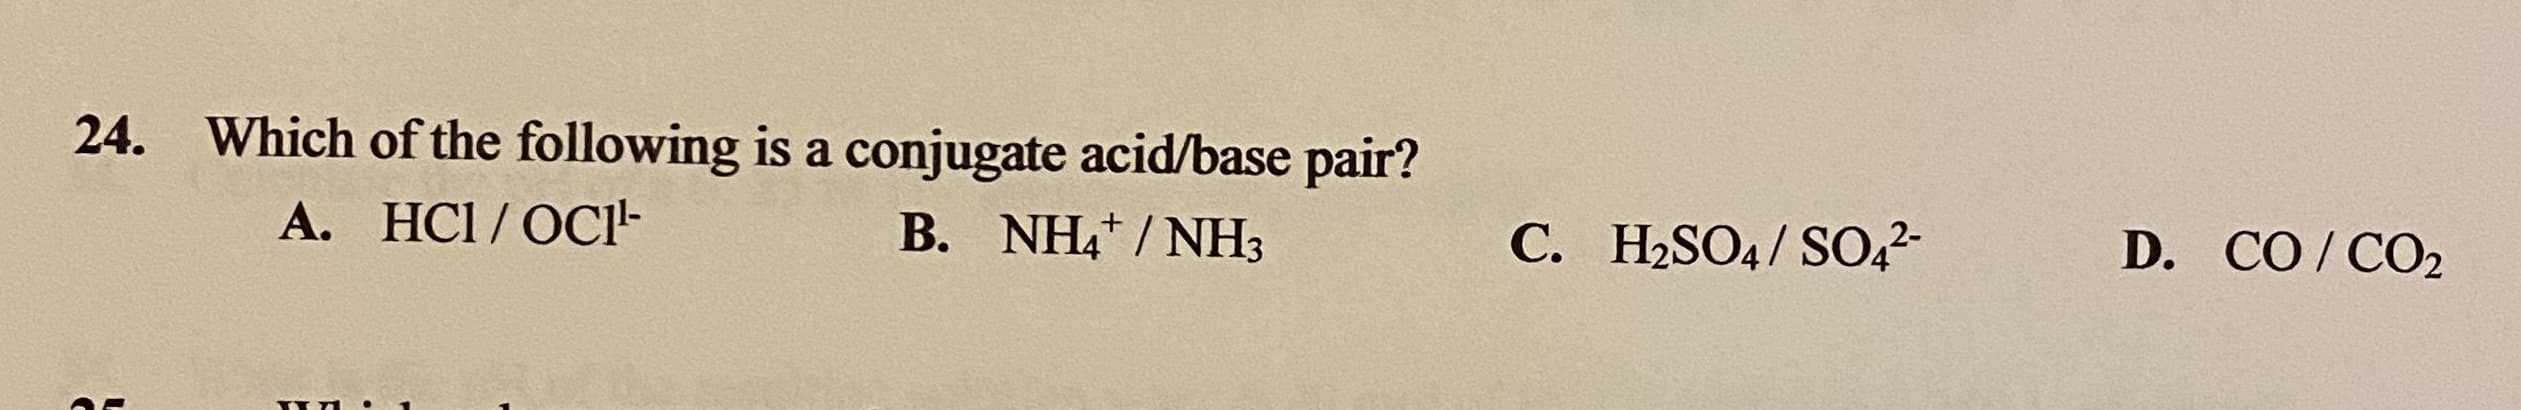 Which of the following is a conjugate acid/base pair?
A. HCI /OCl-
B. NH4/ NH3
C. H2SO4/ SO,2-
D. CO/CO2
